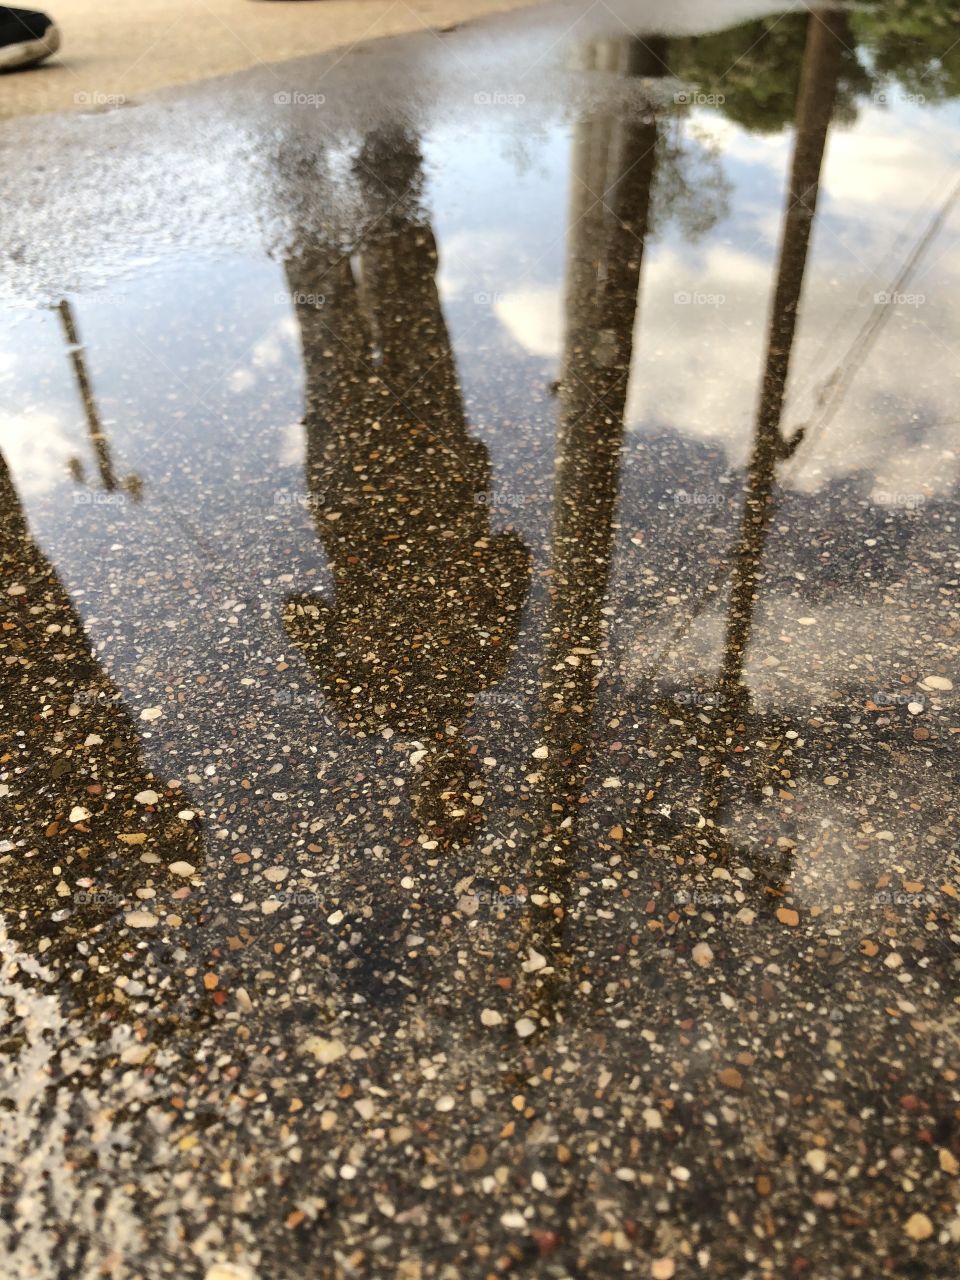 Person reflected in puddle with brown pebbles